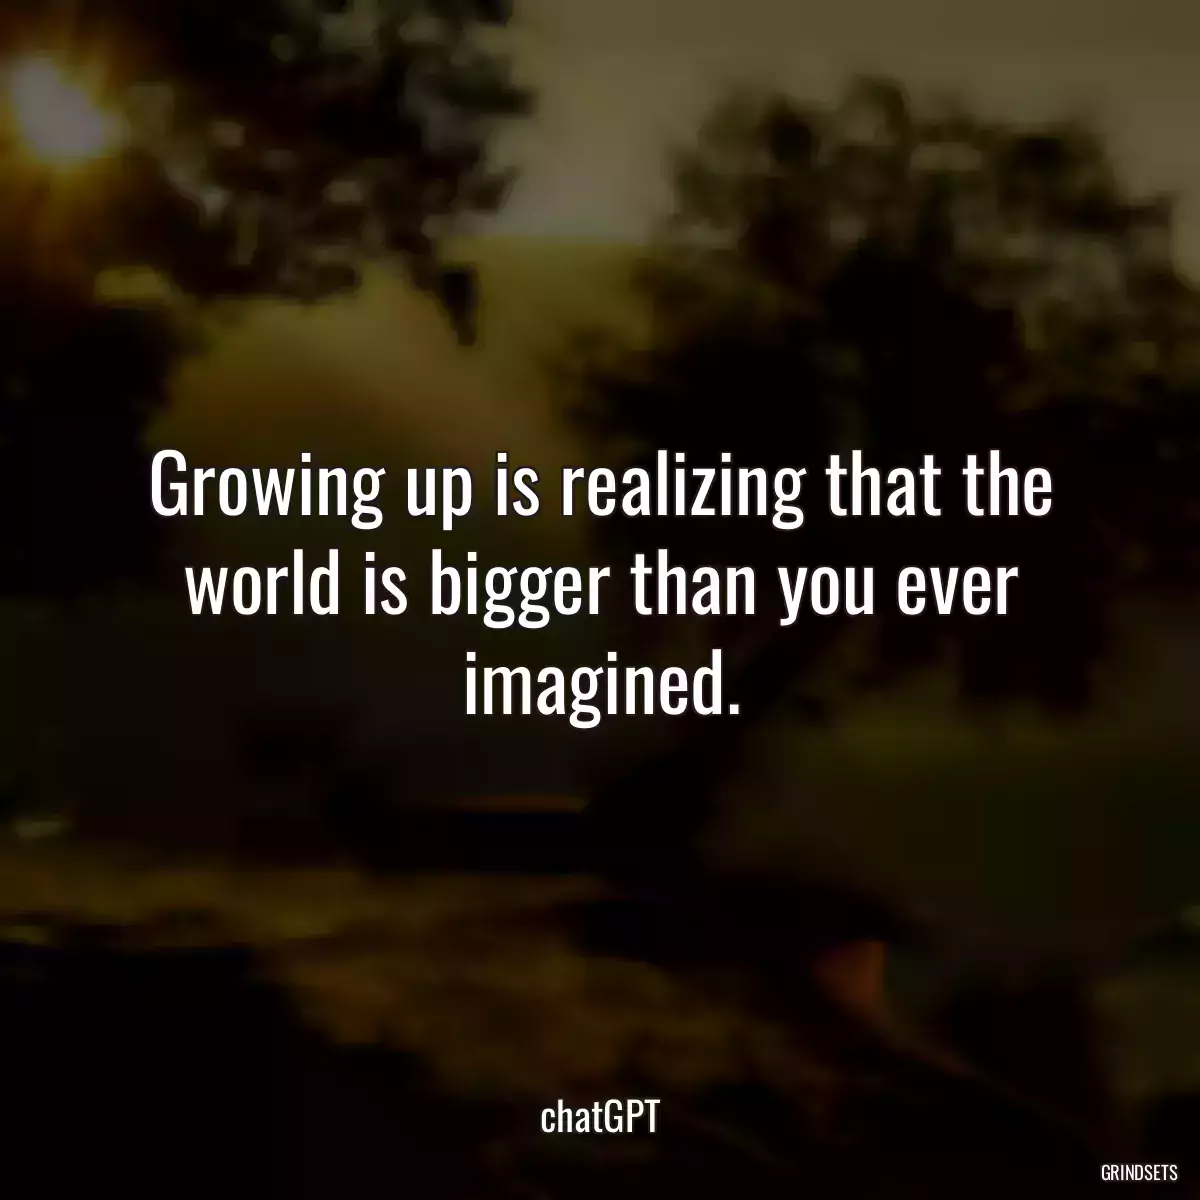 Growing up is realizing that the world is bigger than you ever imagined.